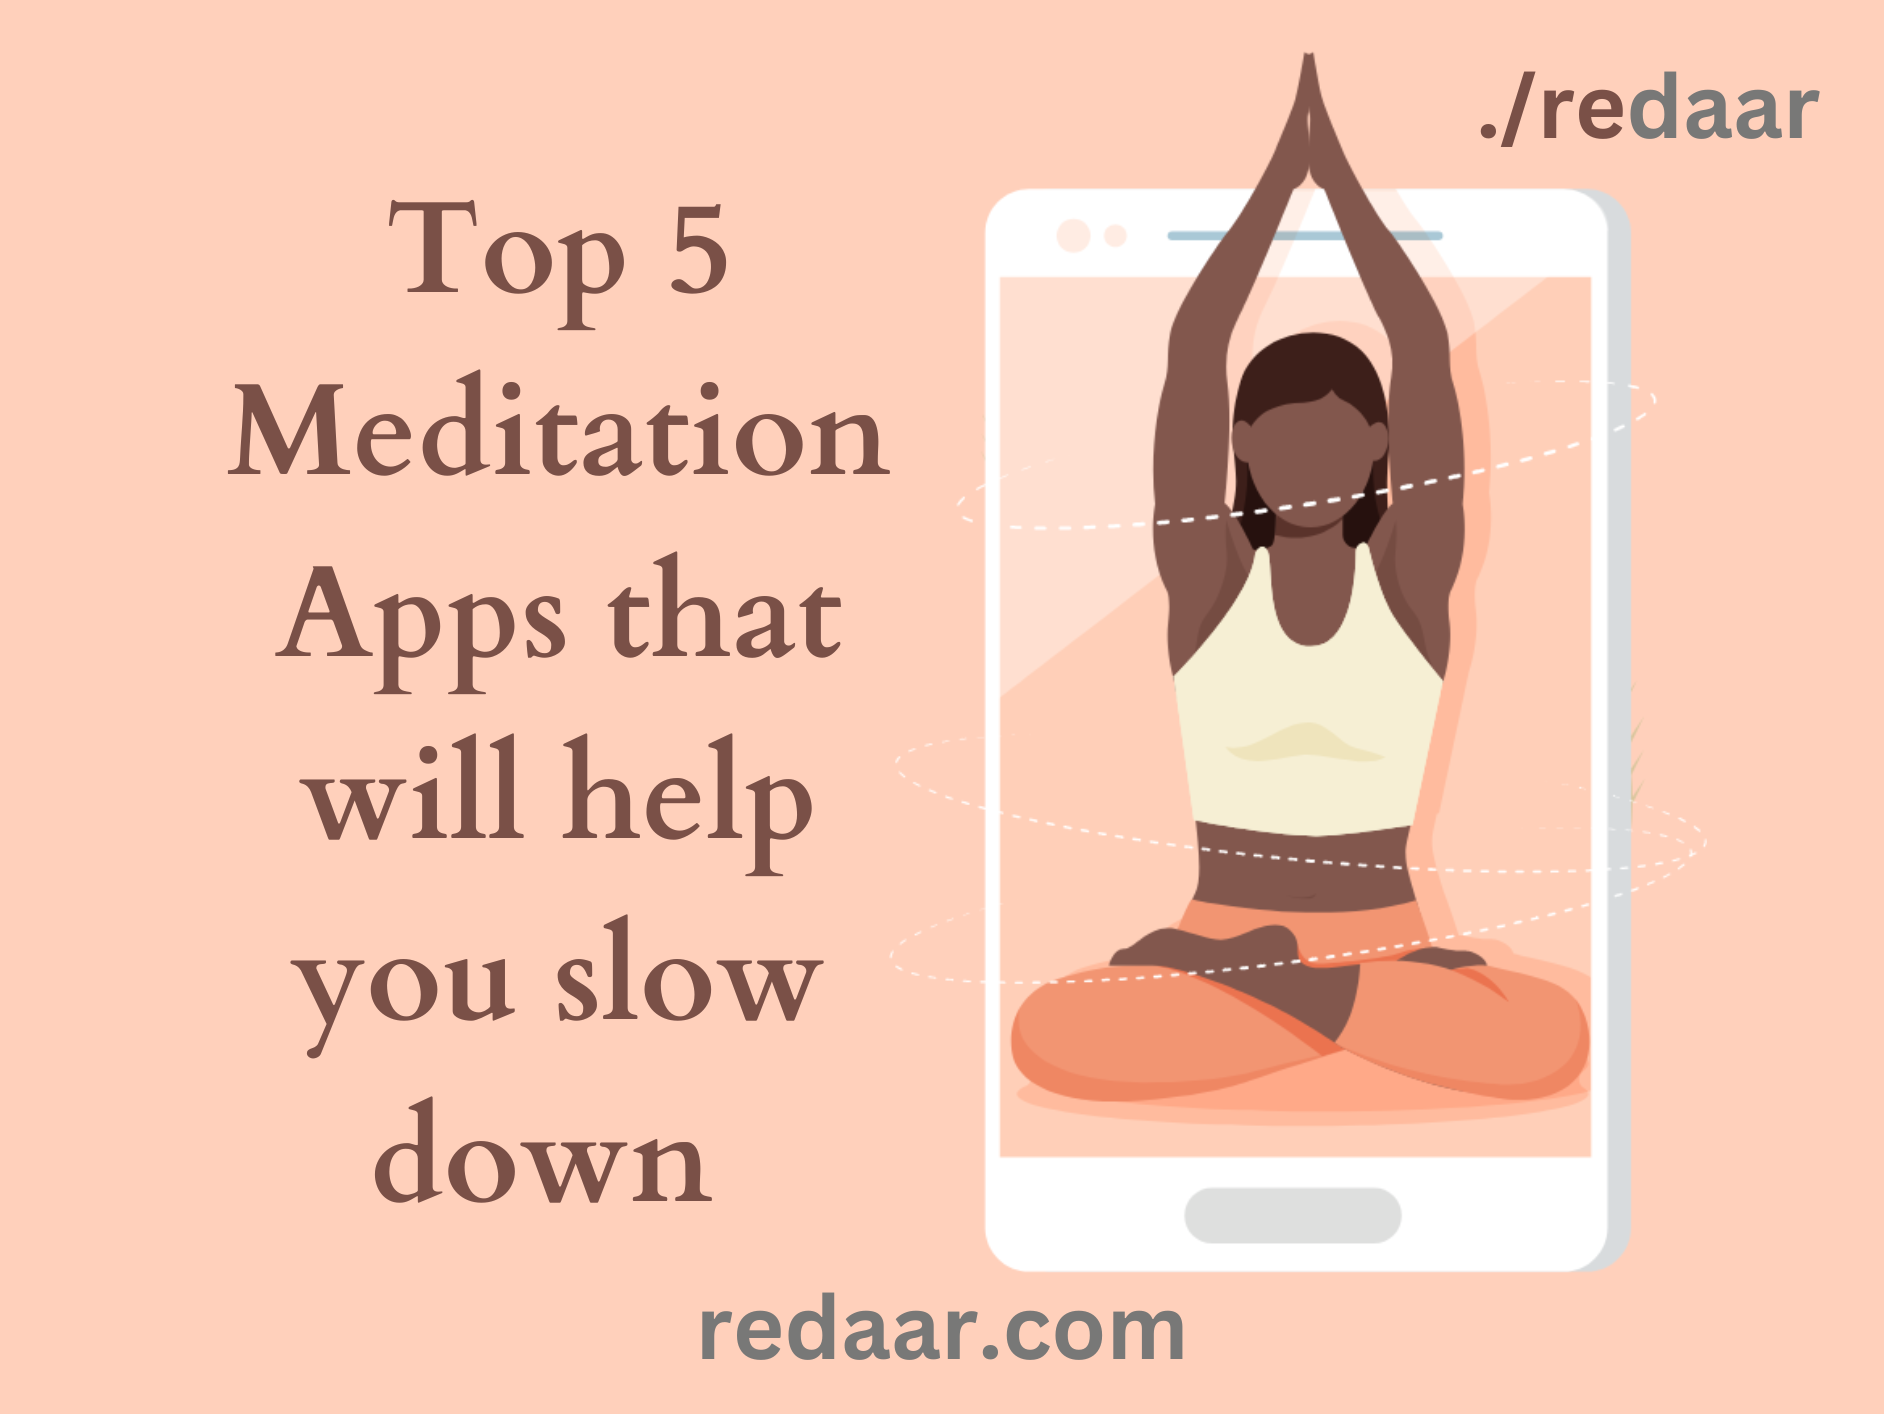 Top Meditation Apps that will help you slow down